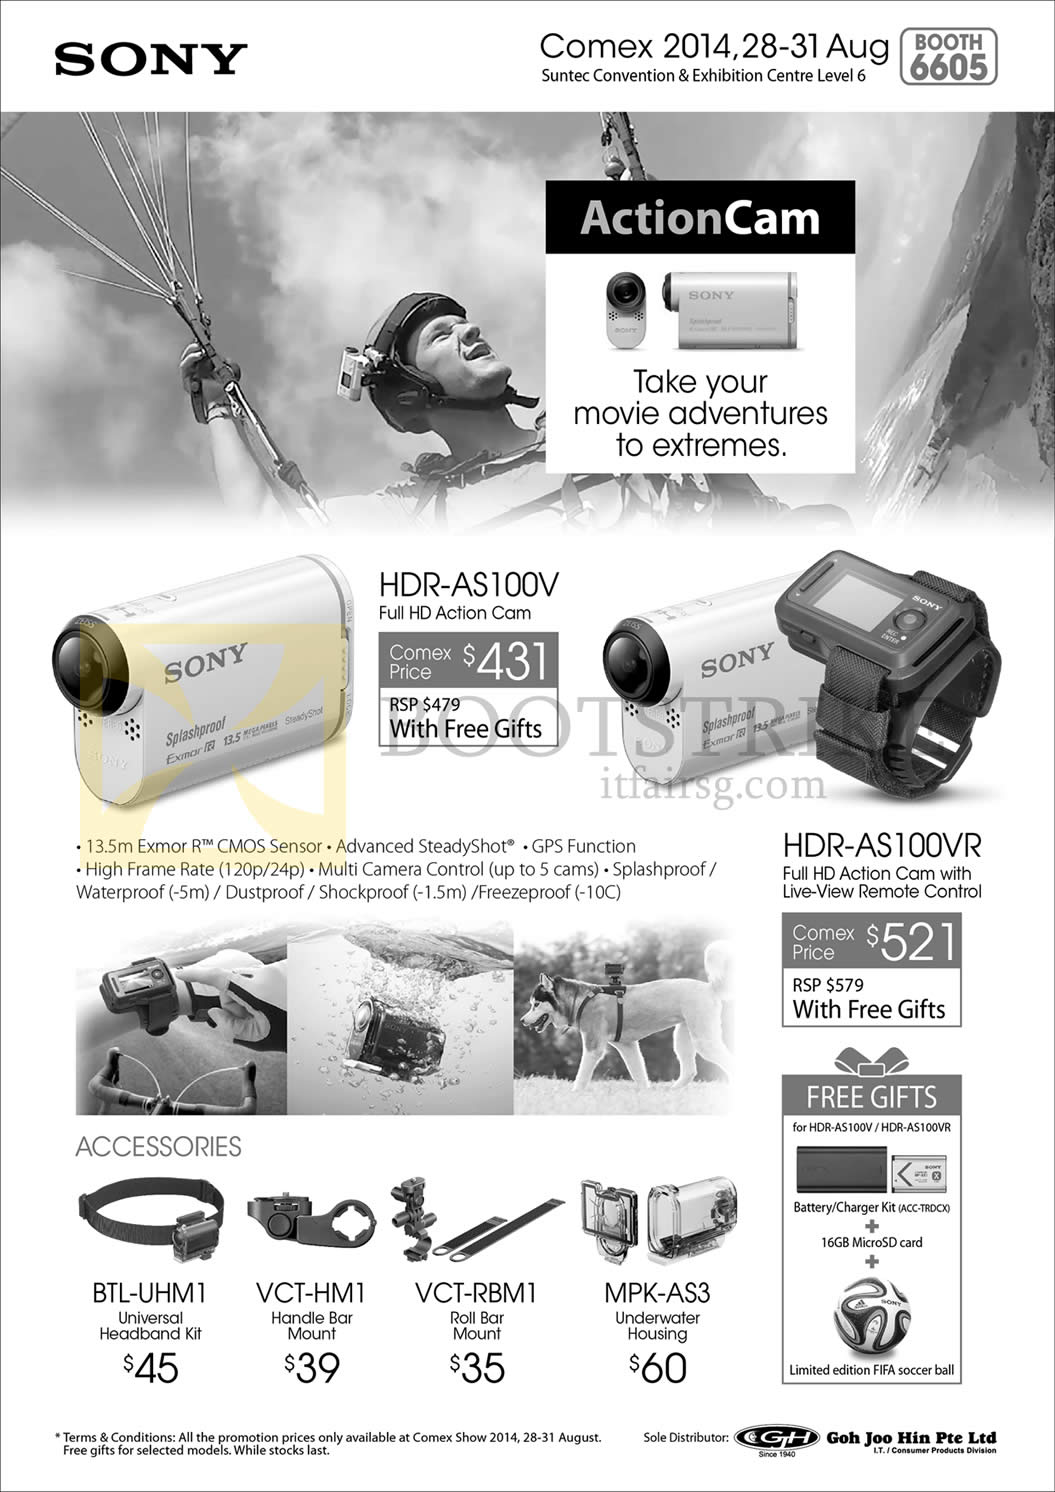 COMEX 2014 price list image brochure of Sony Camcorder HDR-AS100V HD Action Cam, Universal Headband Kit, Handle Bar Mount, Roll Bar Mount, Underwater Housing